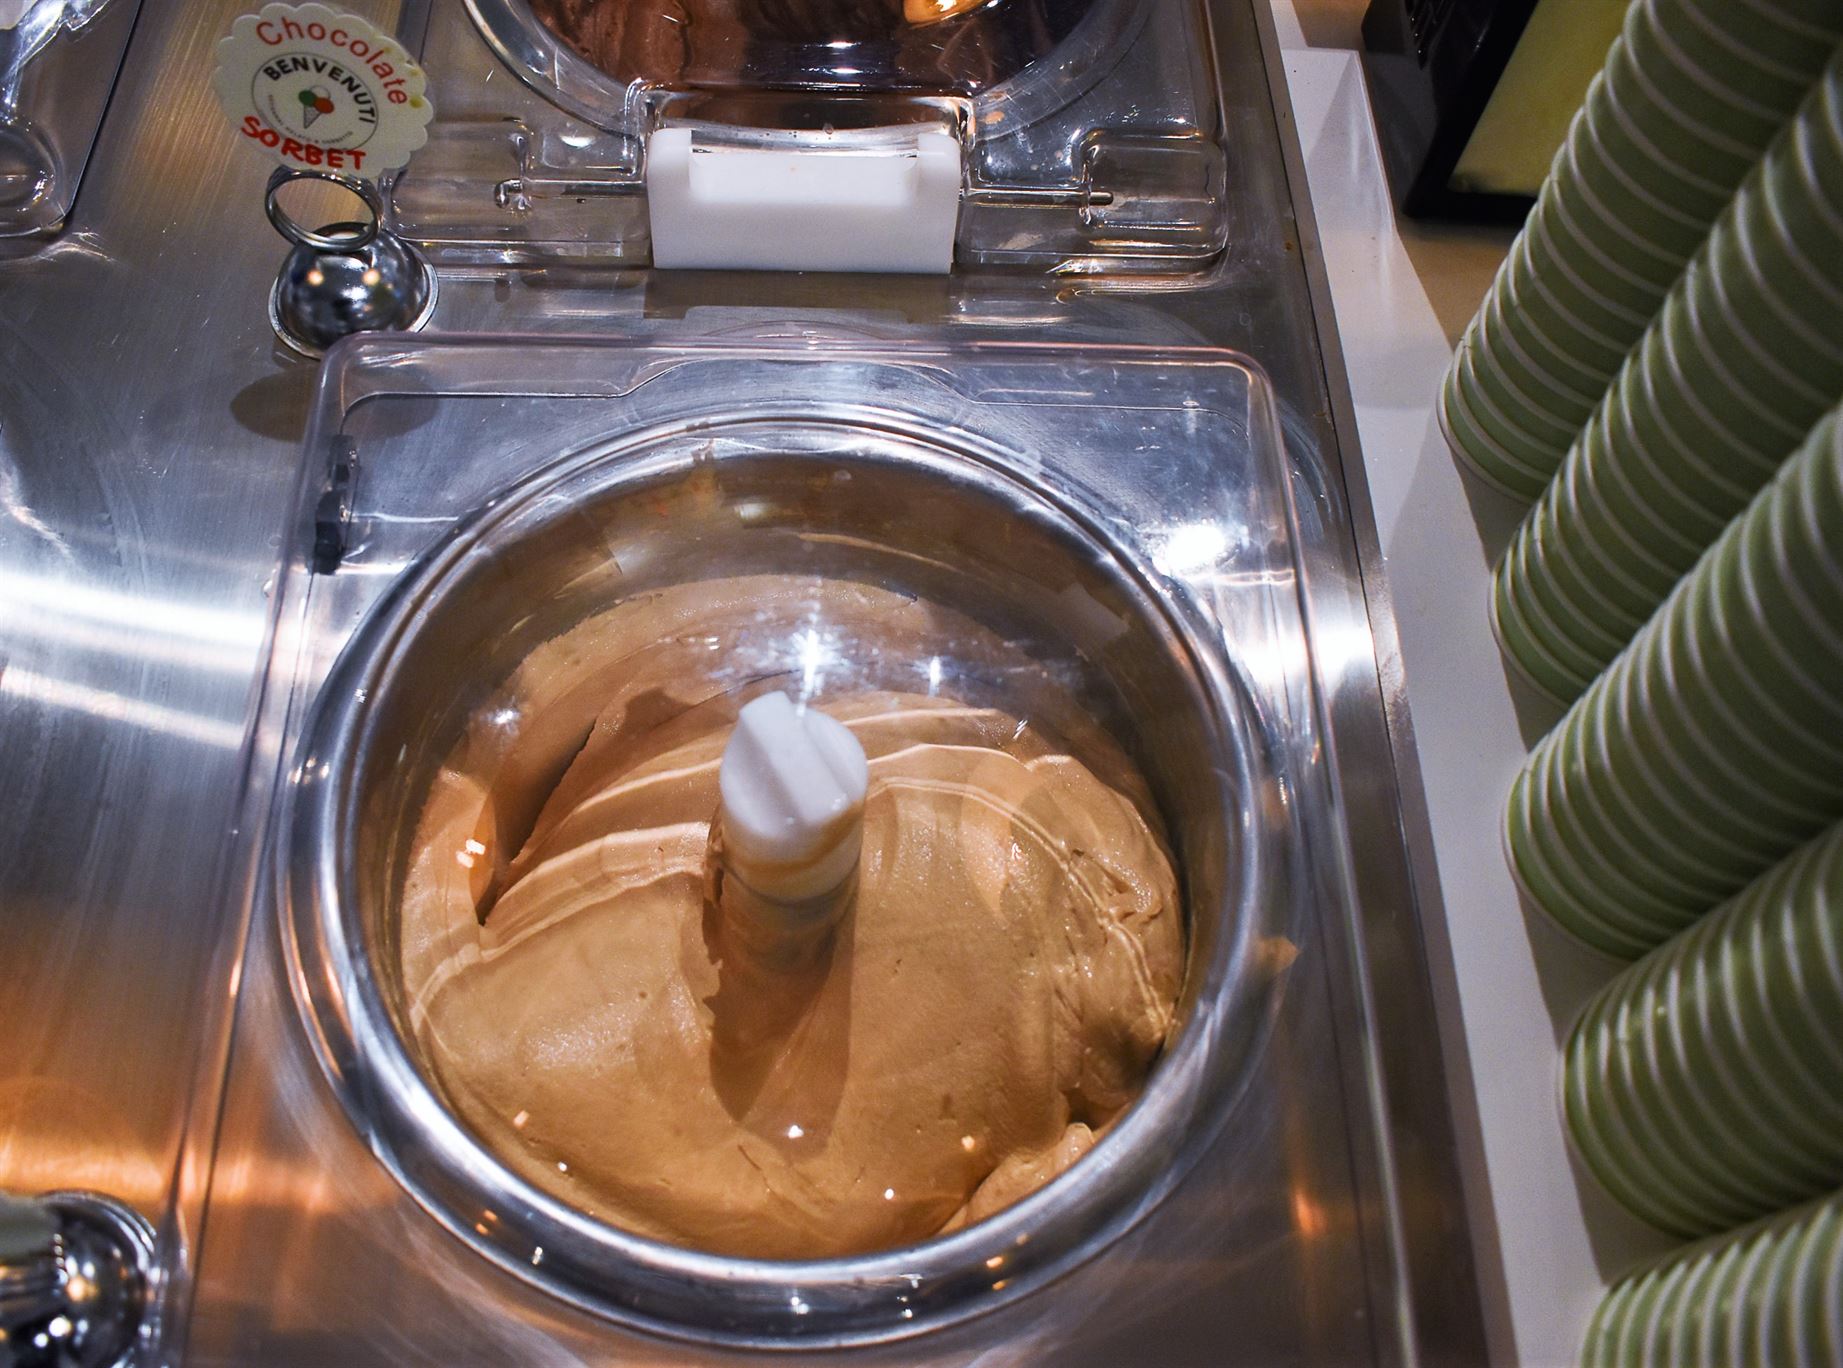 The machines are constantly turning. This allows them to add new gelato mix almost on the hour, keeping it light and fresh for all of their customers. Samantha Bailey | The Montclarion